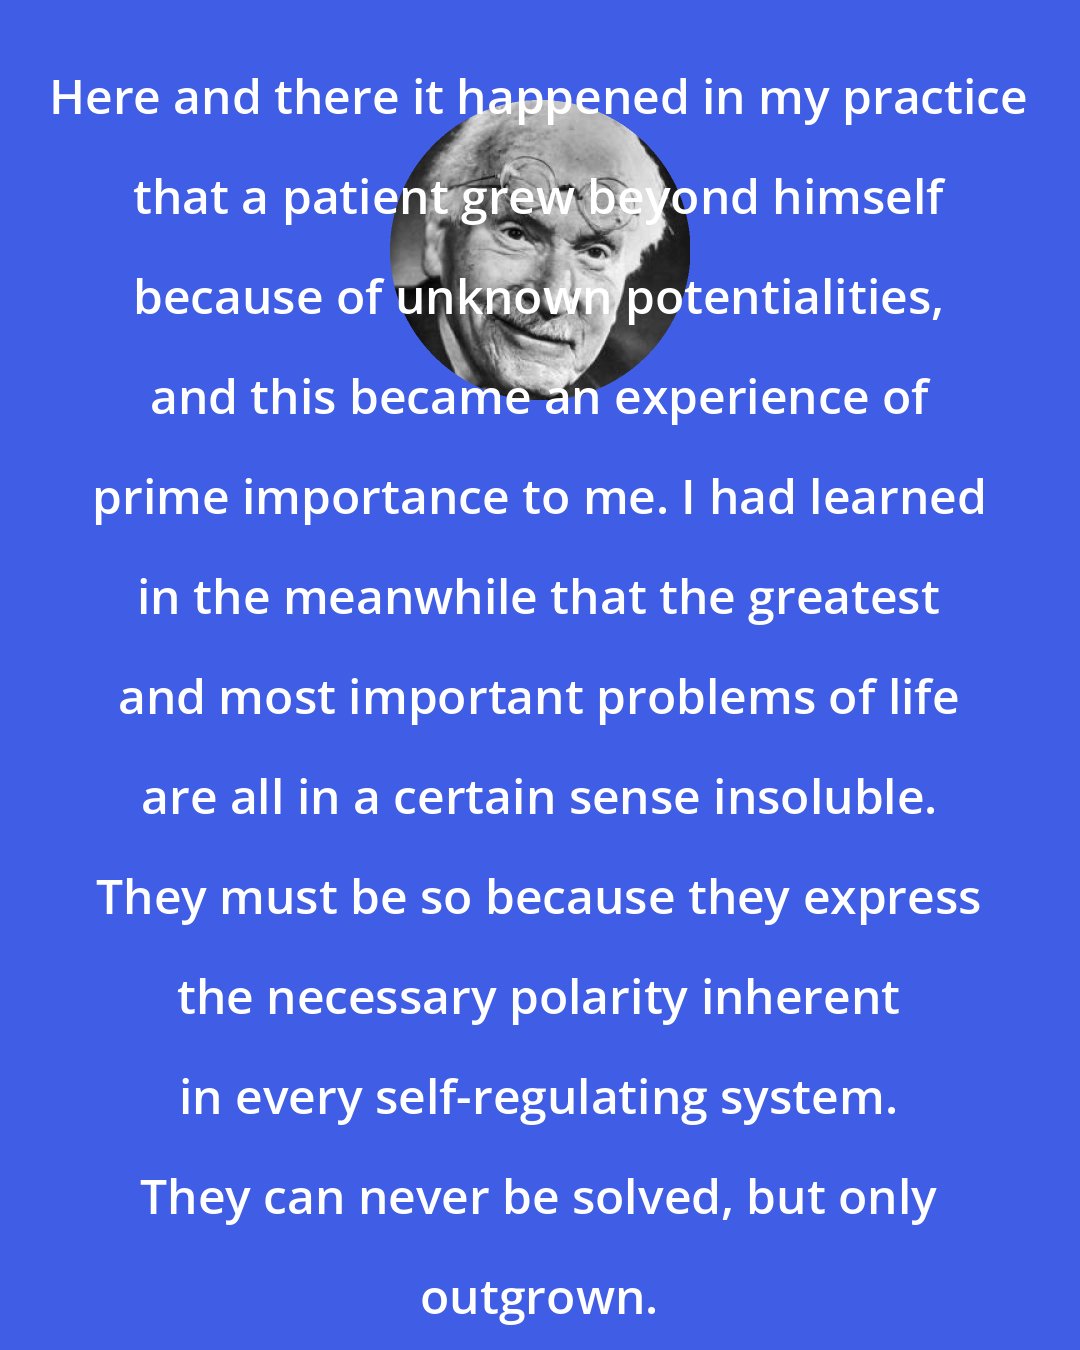 Carl Jung: Here and there it happened in my practice that a patient grew beyond himself because of unknown potentialities, and this became an experience of prime importance to me. I had learned in the meanwhile that the greatest and most important problems of life are all in a certain sense insoluble. They must be so because they express the necessary polarity inherent in every self-regulating system. They can never be solved, but only outgrown.